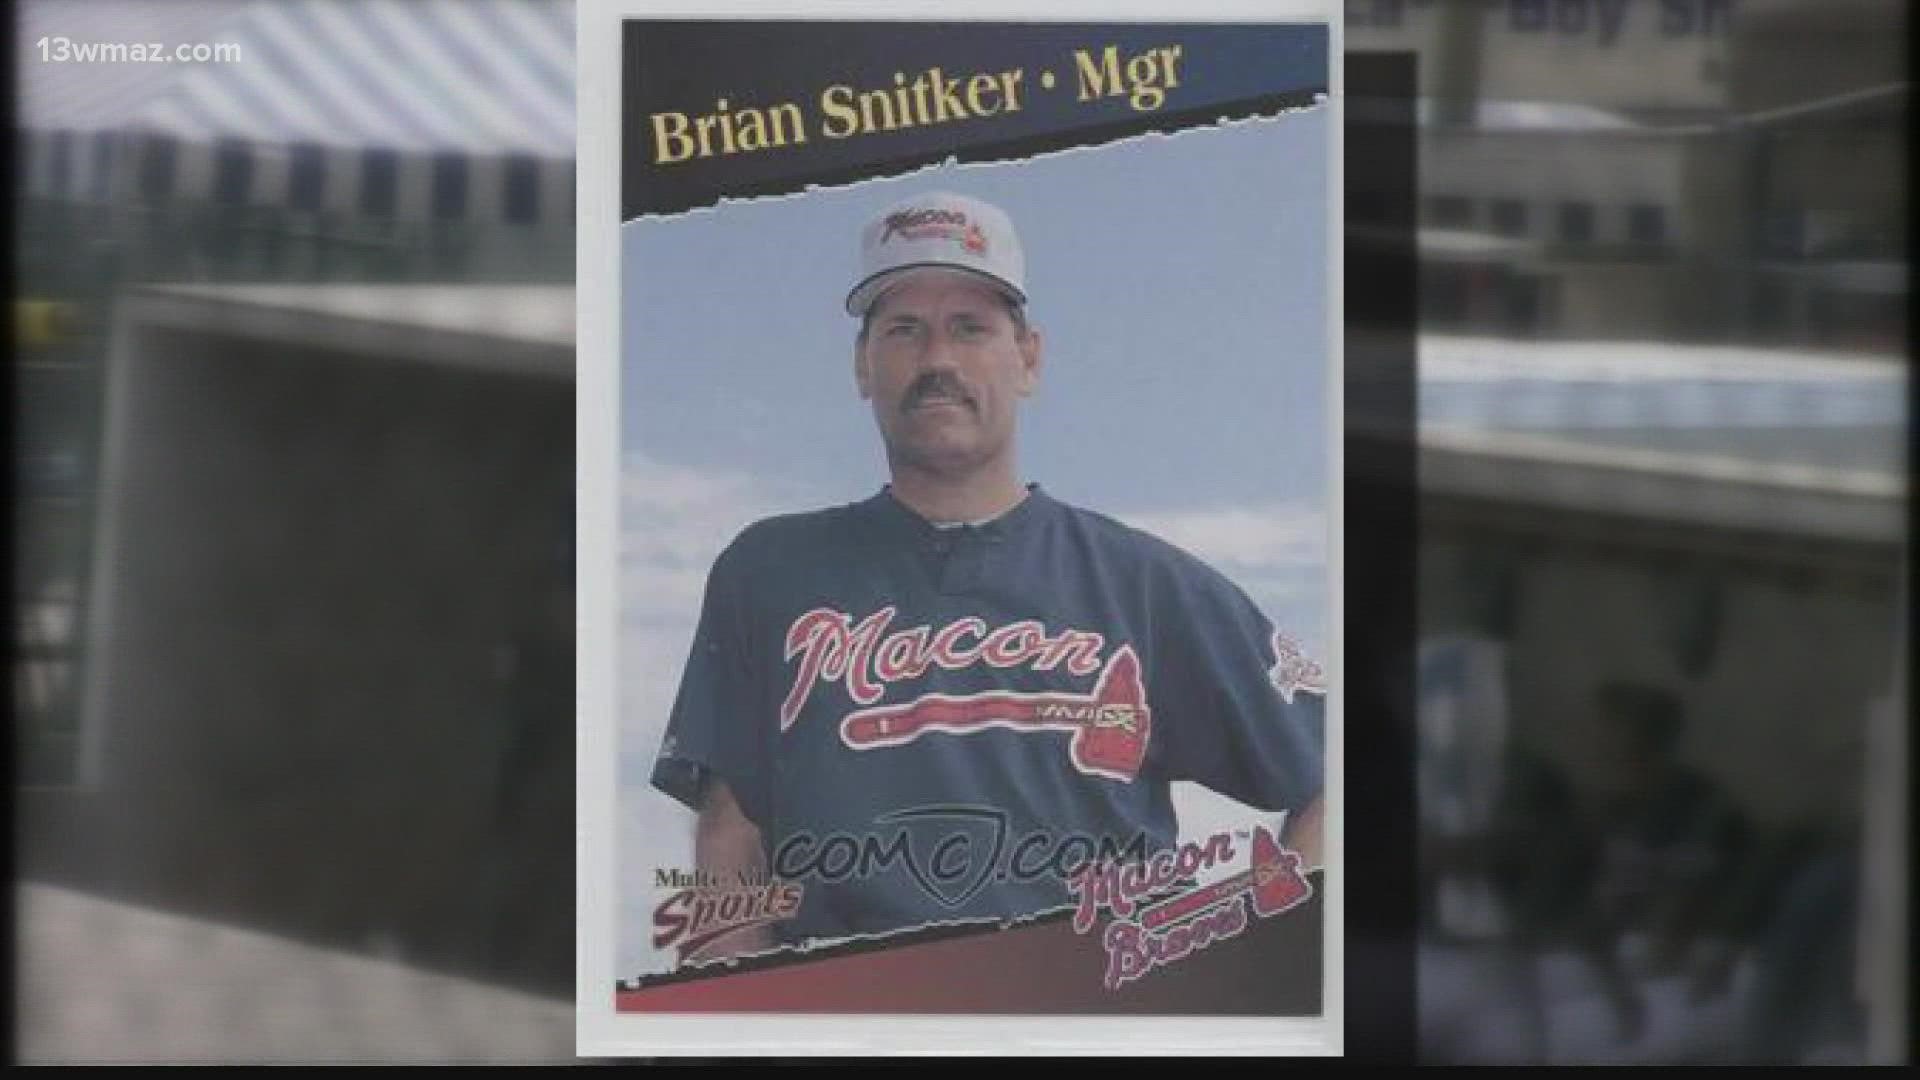 Atlanta Braves manager has roots with Macon's former baseball team